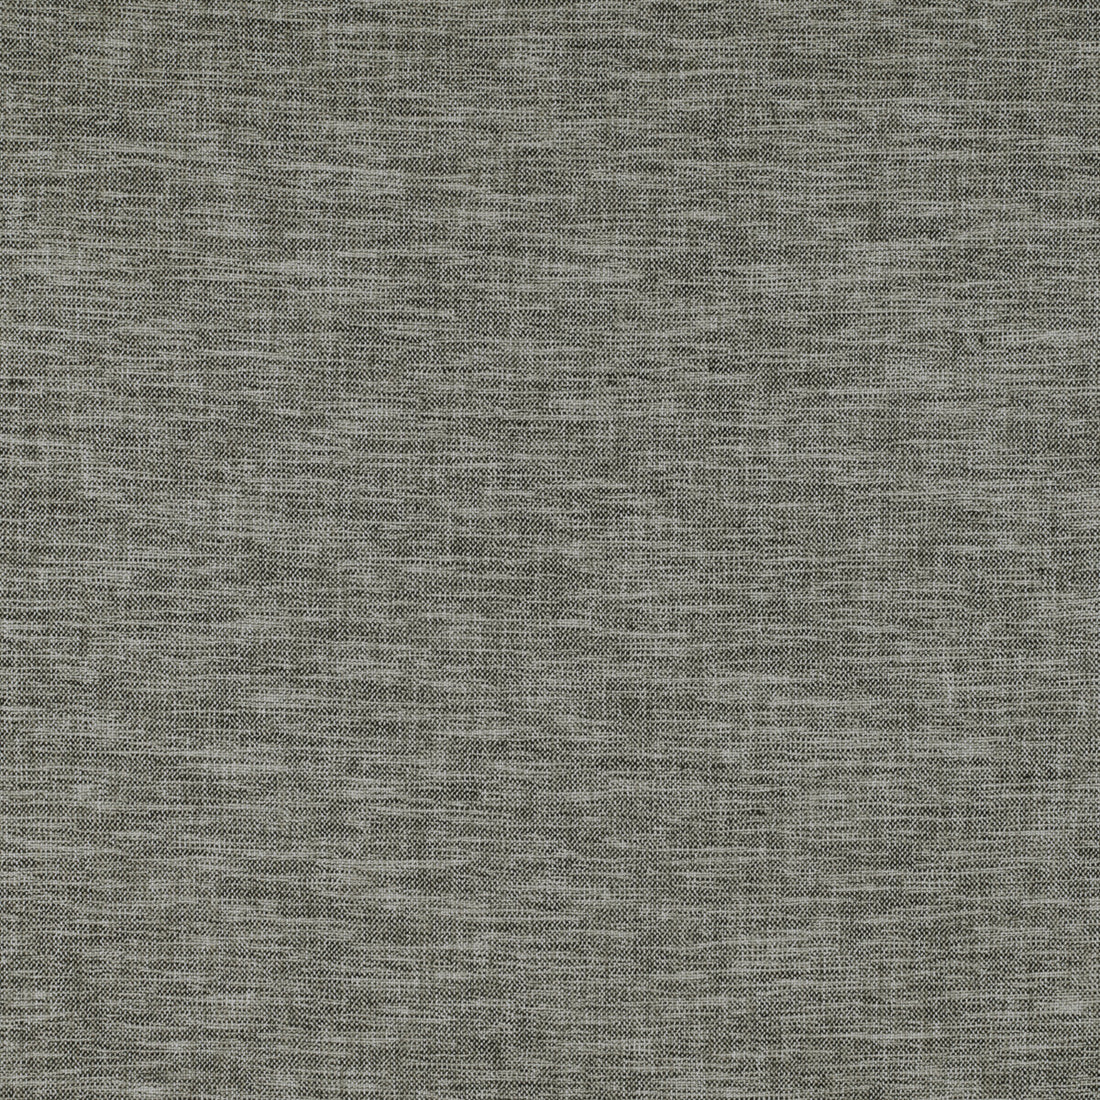 Trento fabric in blanco/onyx color - pattern GDT5320.009.0 - by Gaston y Daniela in the Tierras collection